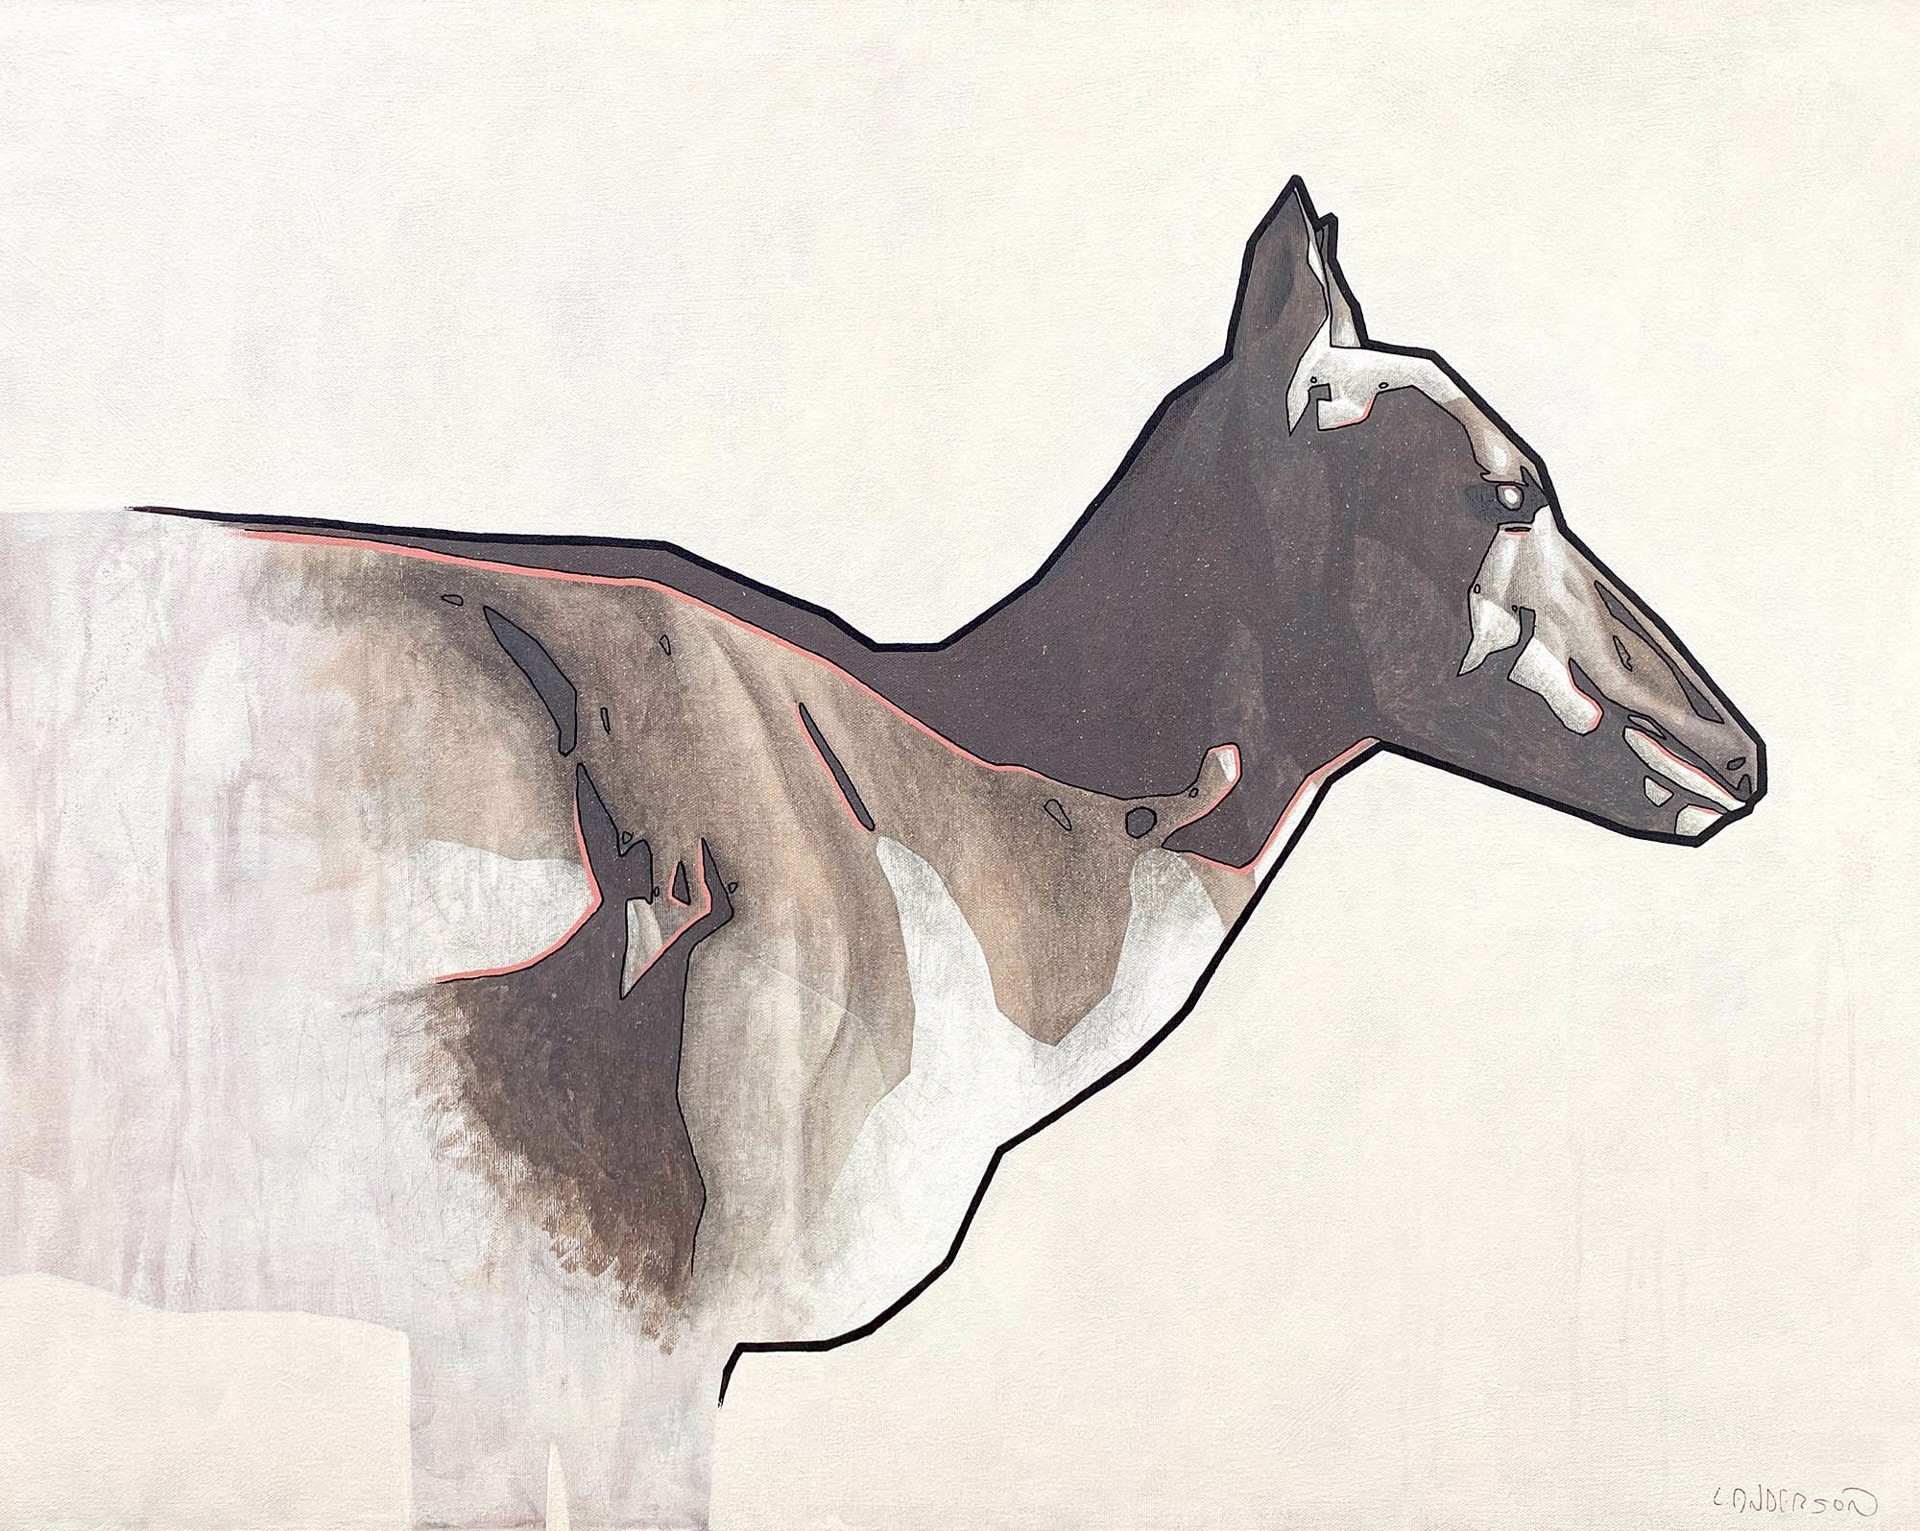 Original Sketch Painting By Luke Anderson Featuring A Pronghorn Antelope In Profile